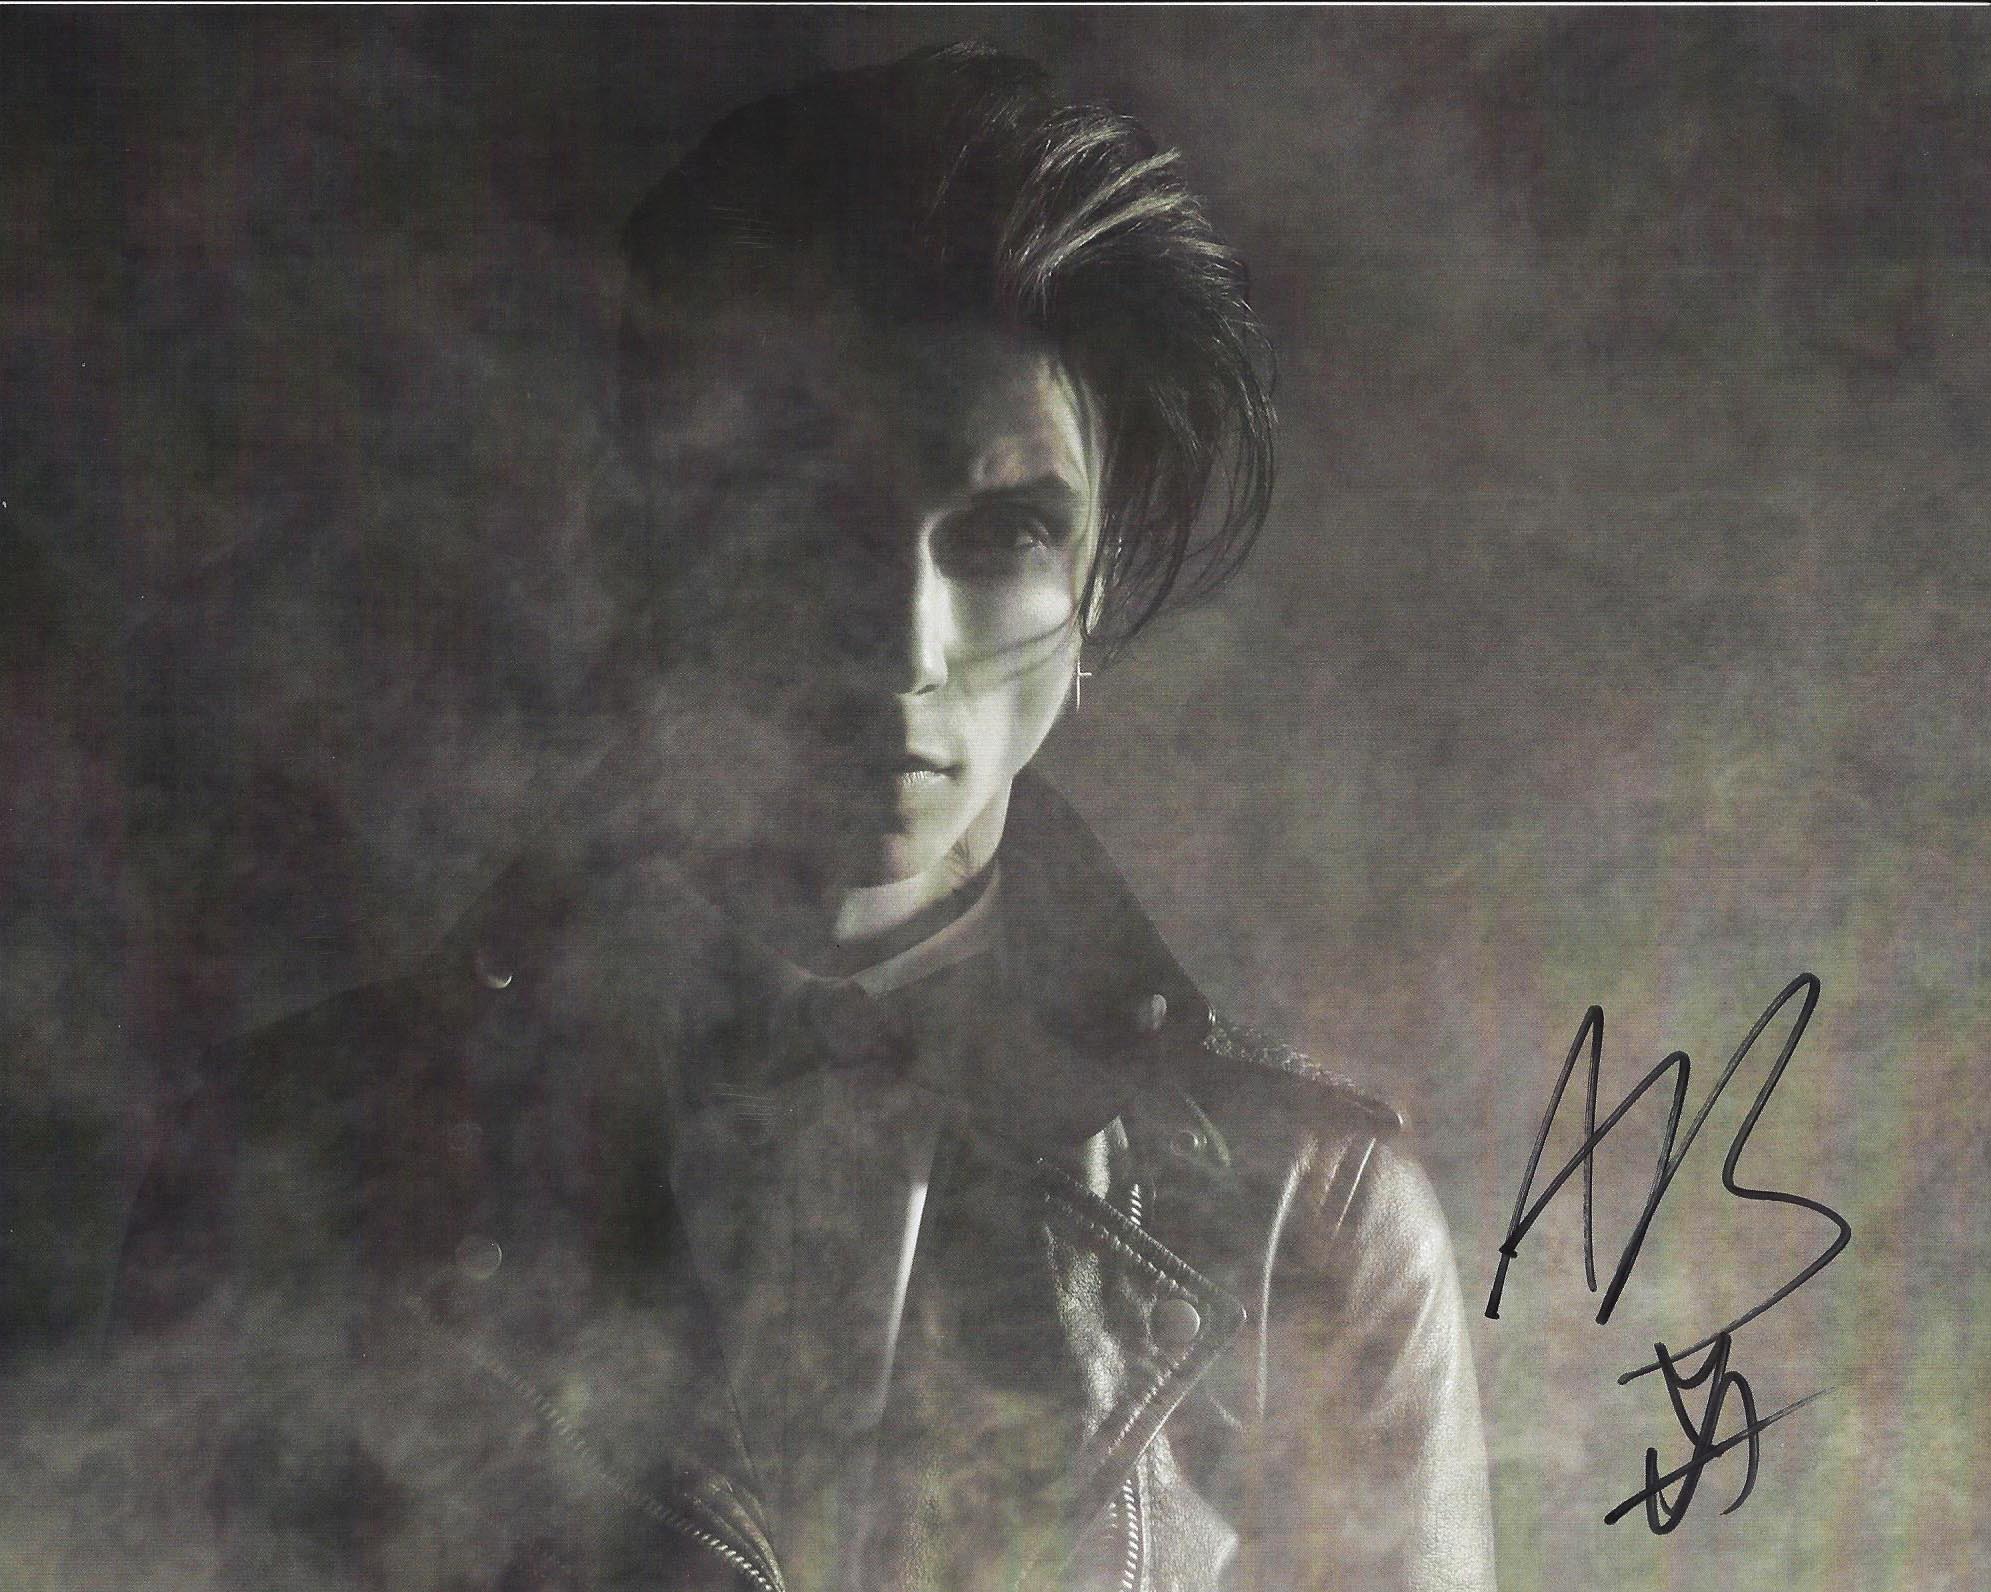 BIERSACK THE SHADOW SIDE FRAMED CD PRESENTATION SIGNED/AUTOGRAPHED ANDY BLACK 